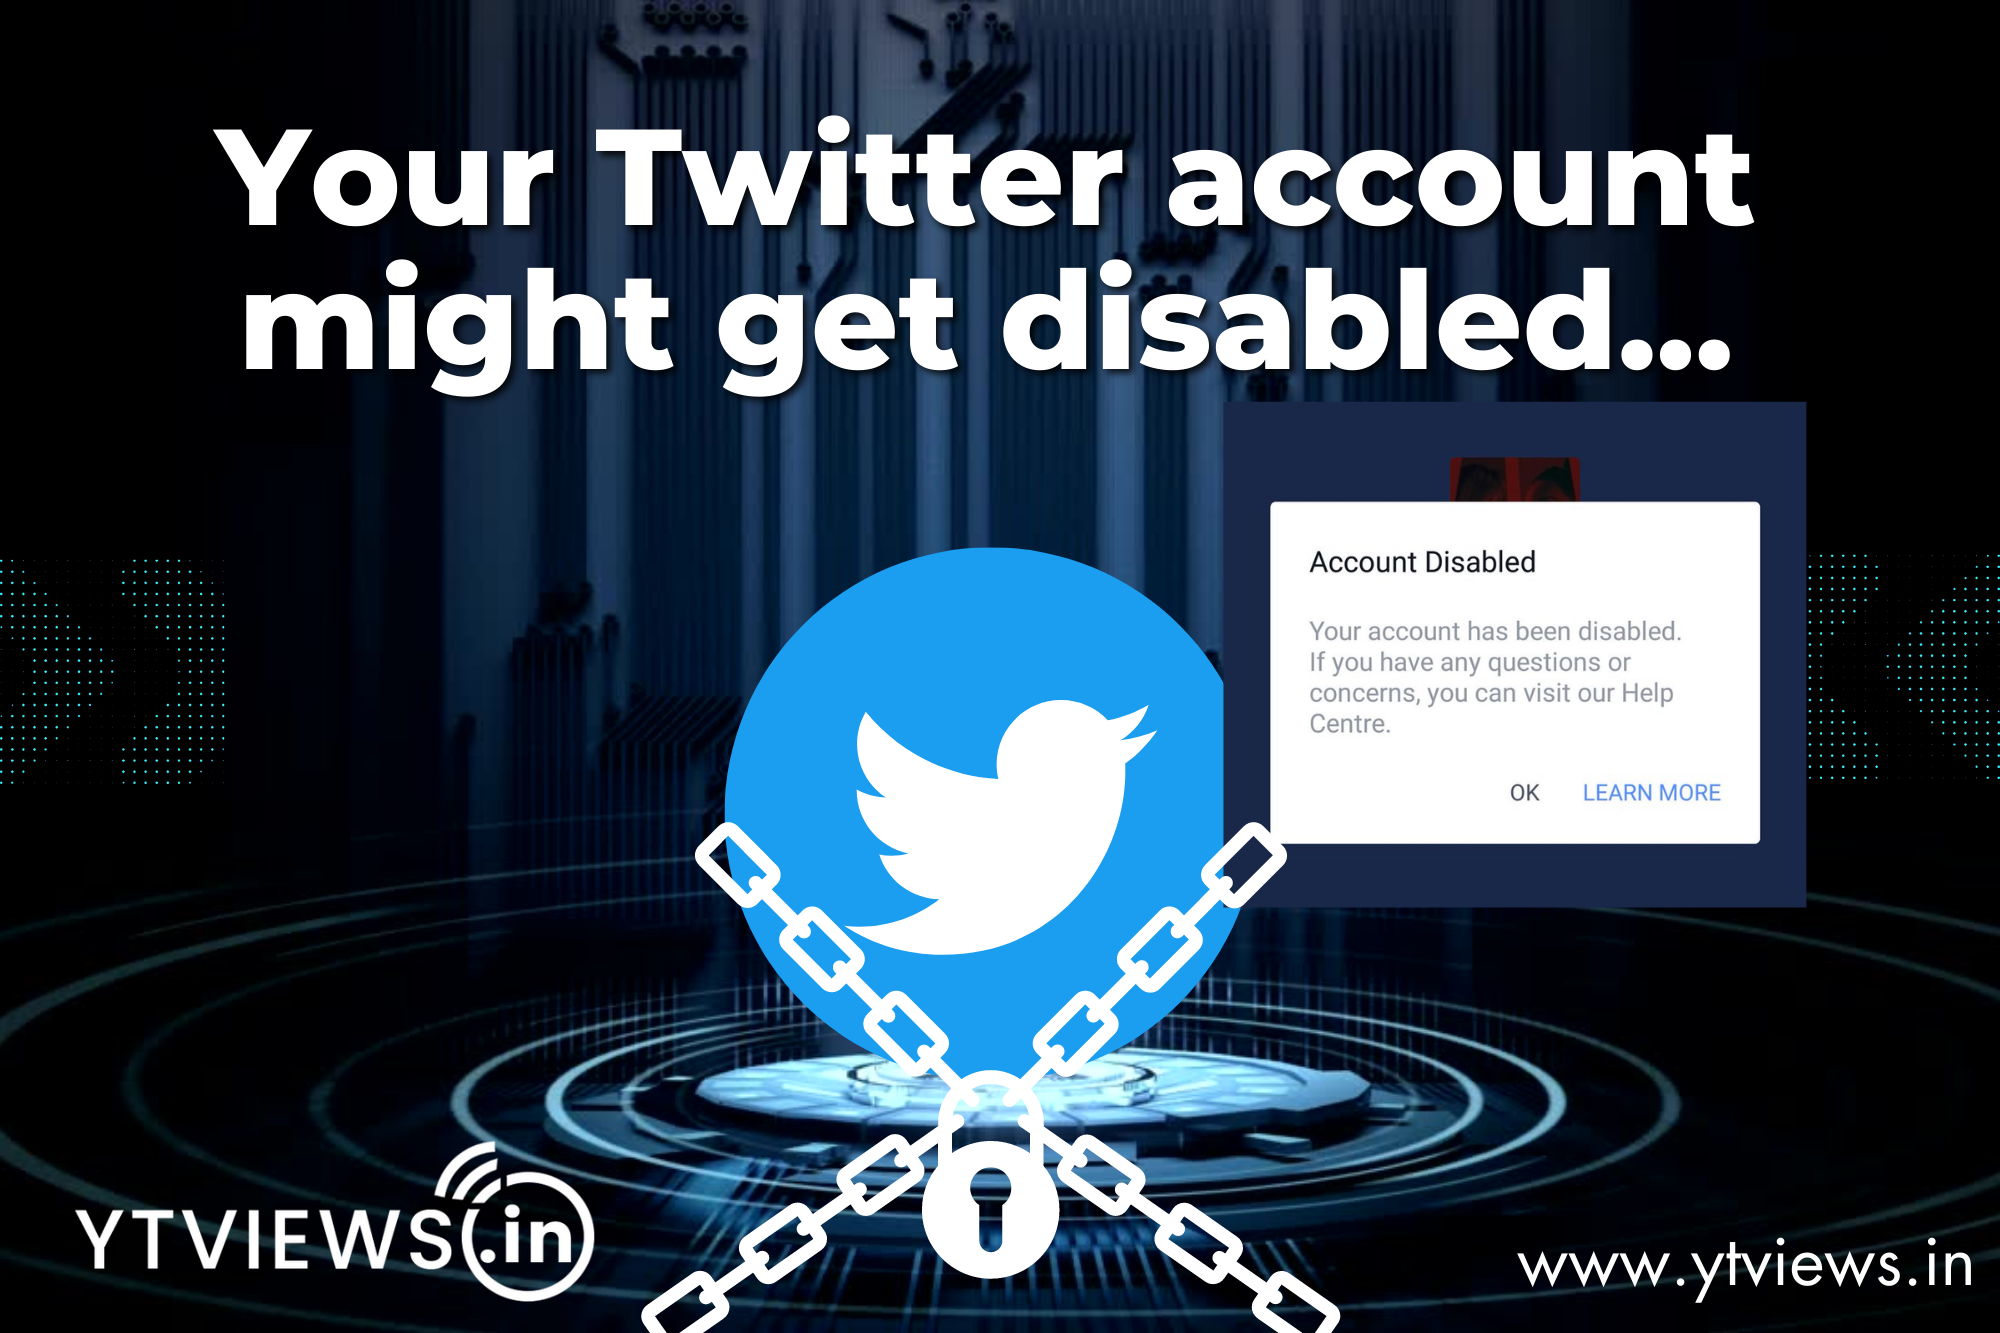 Your Twitter account might soon be disabled according to the new guidelines. Learn more about it: